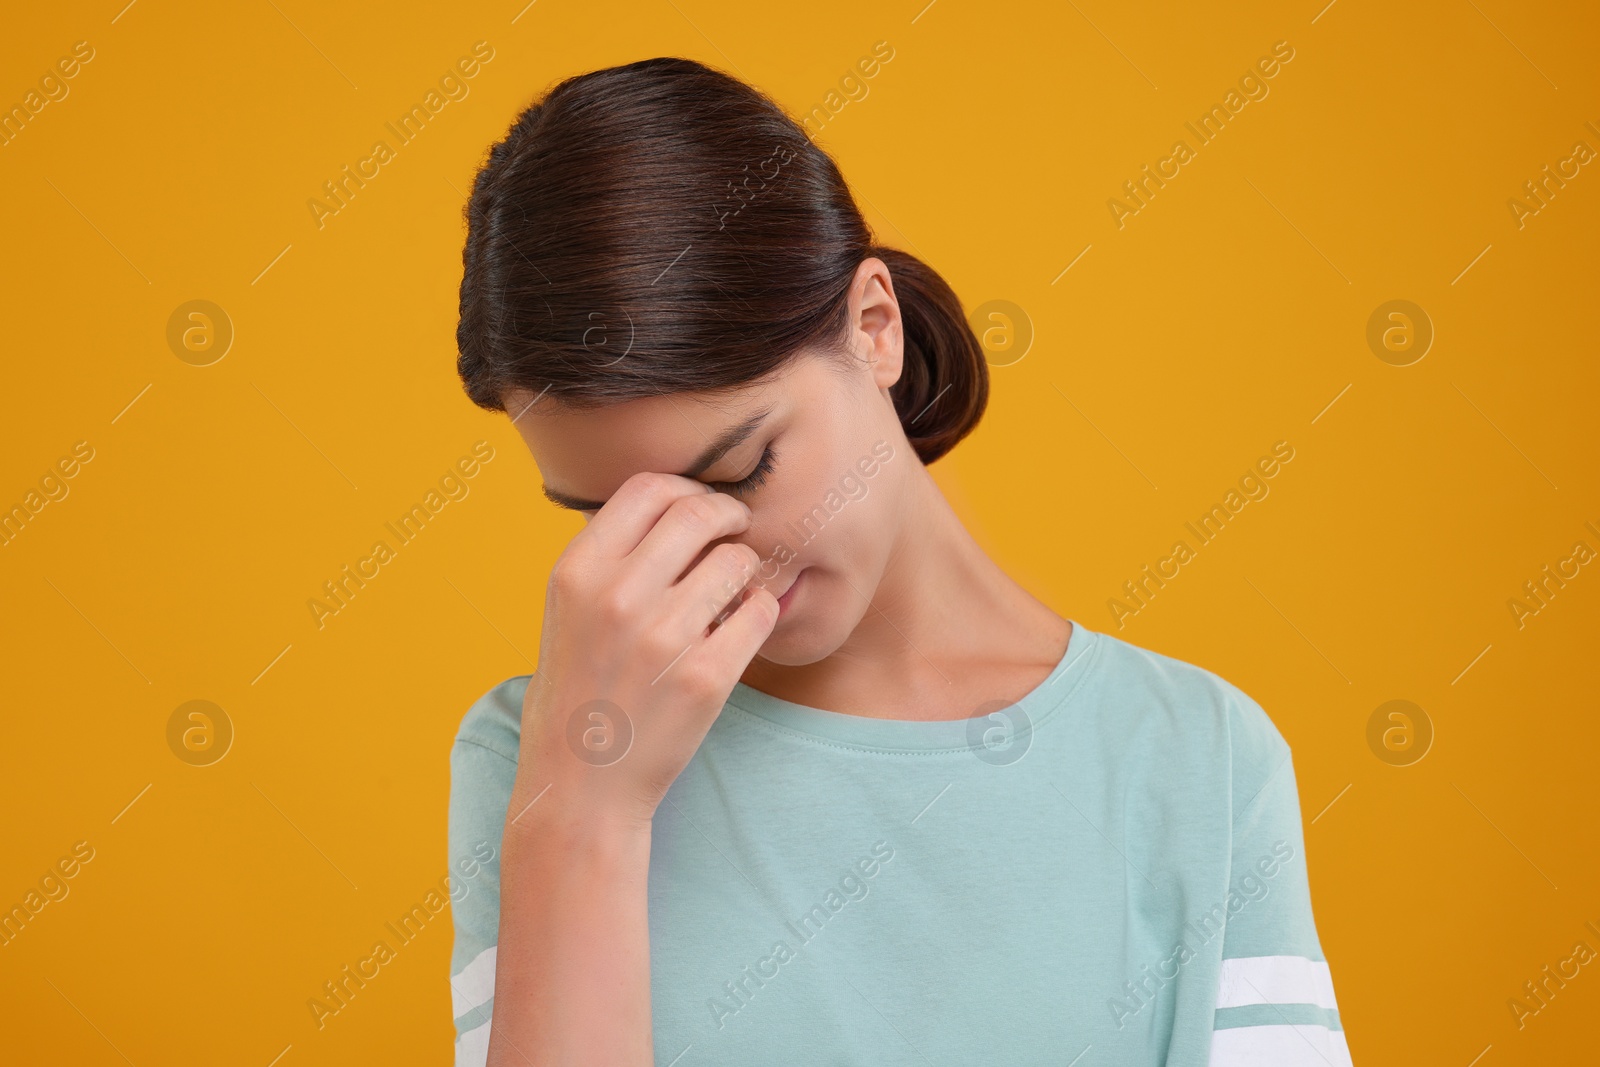 Photo of Embarrassed young woman covering face with hand on orange background